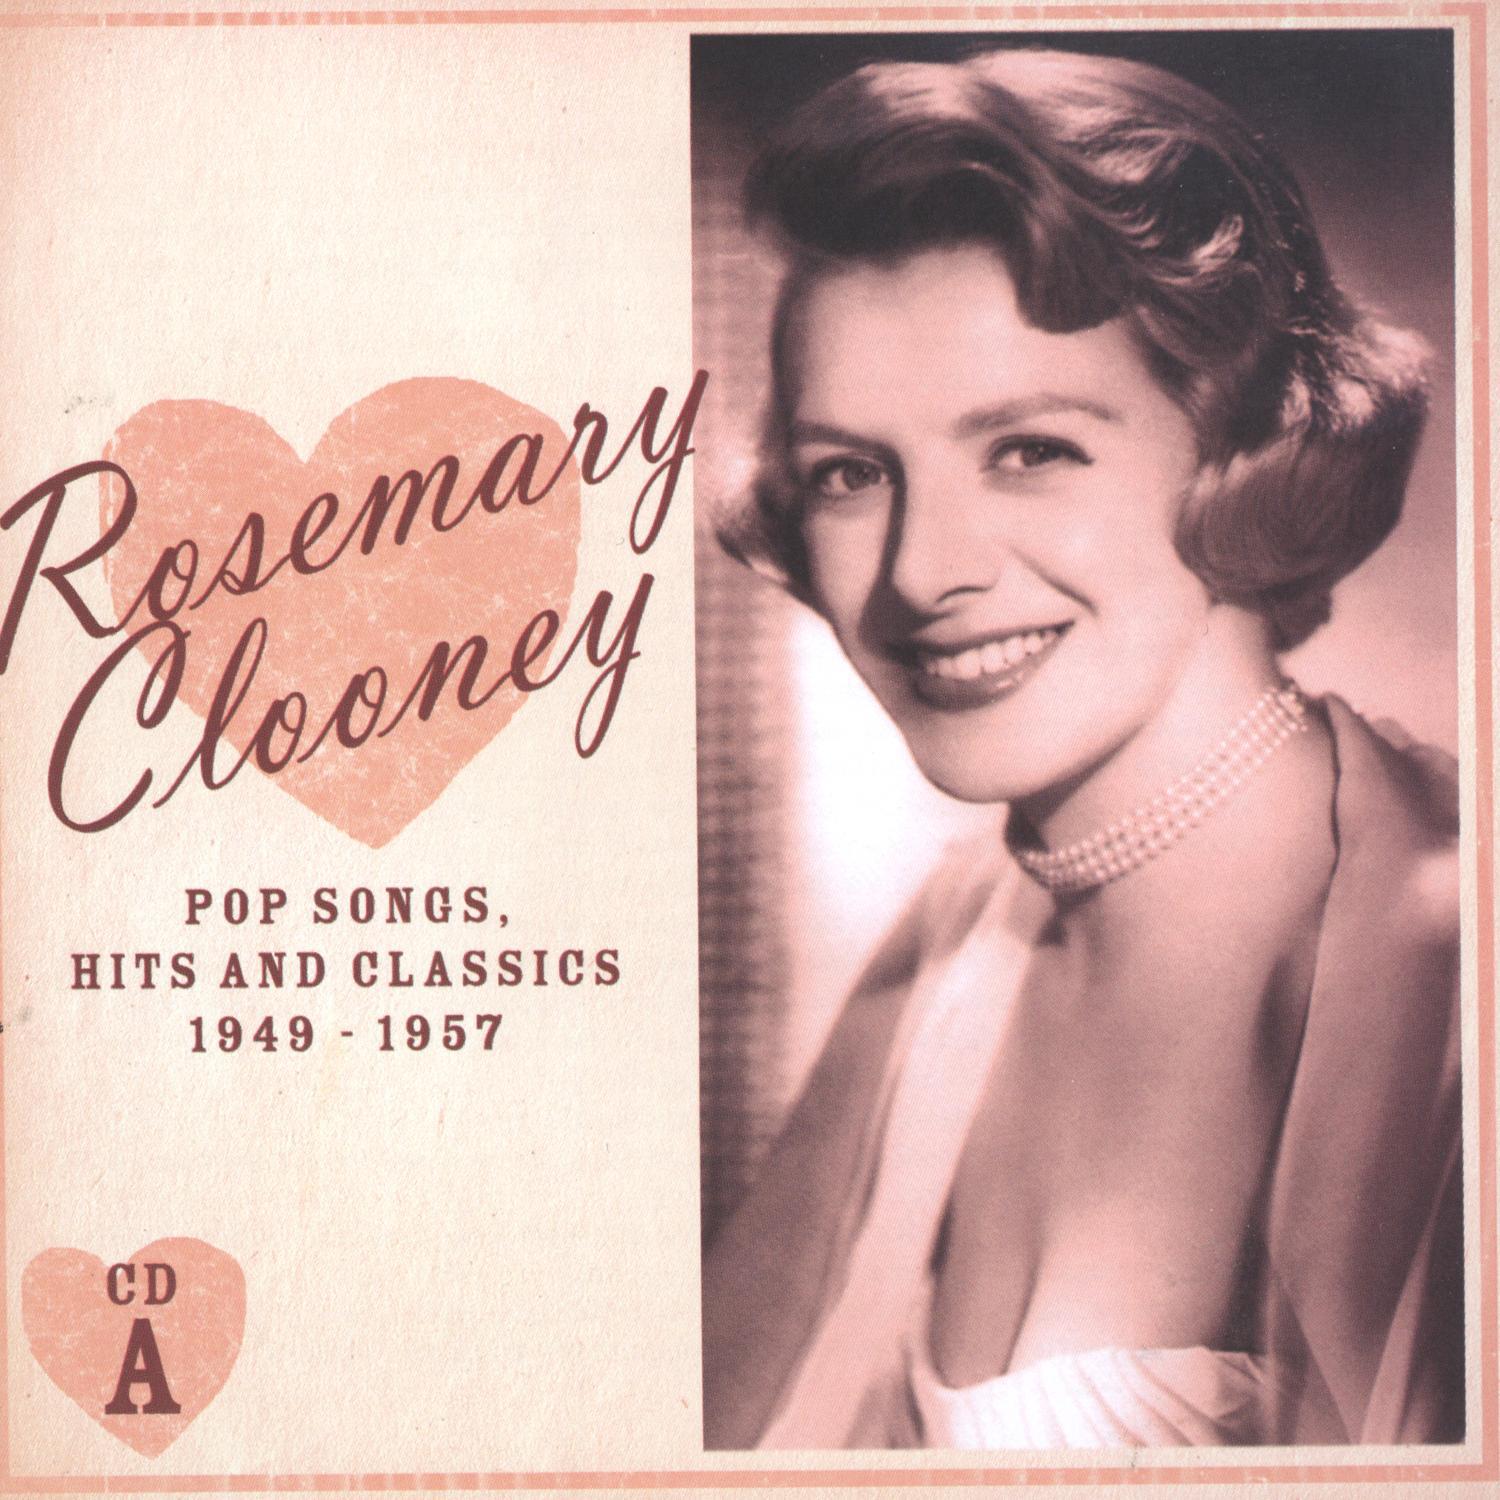 Pop Songs, Hits and Classics 1949-1957